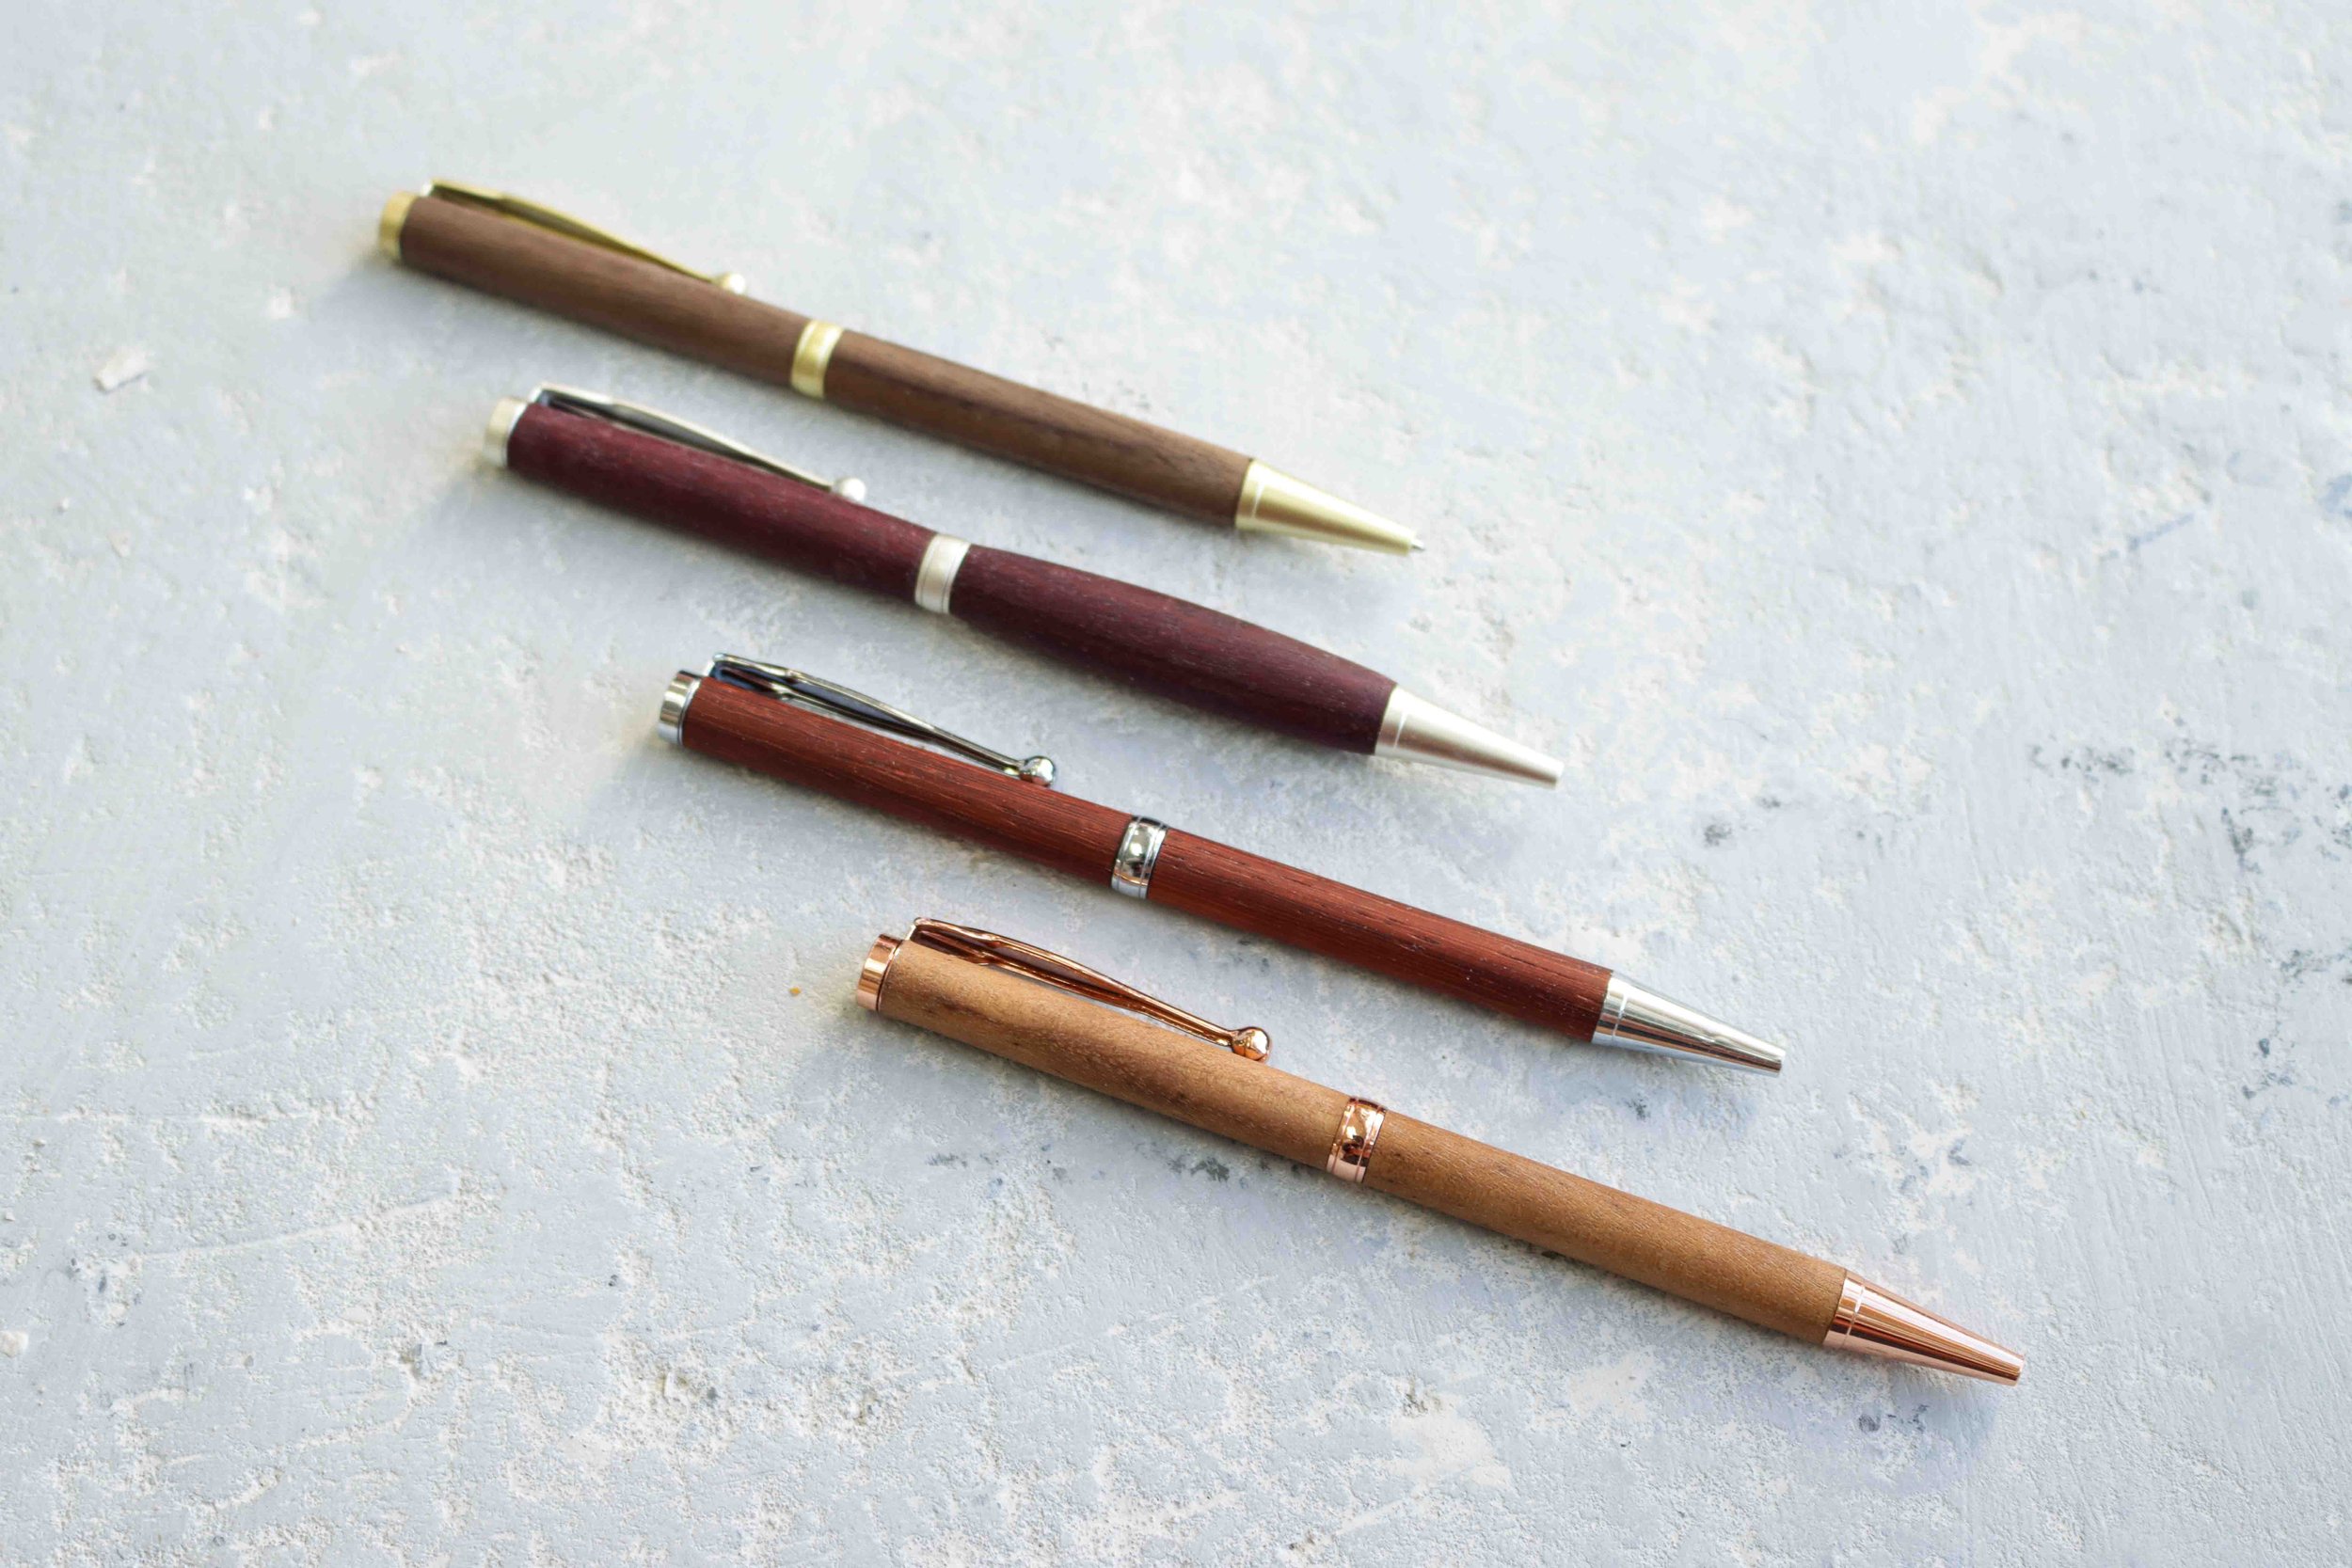 Wooden pencils turned on the lathe (Copy) (Copy) (Copy) (Copy) (Copy) (Copy) (Copy)